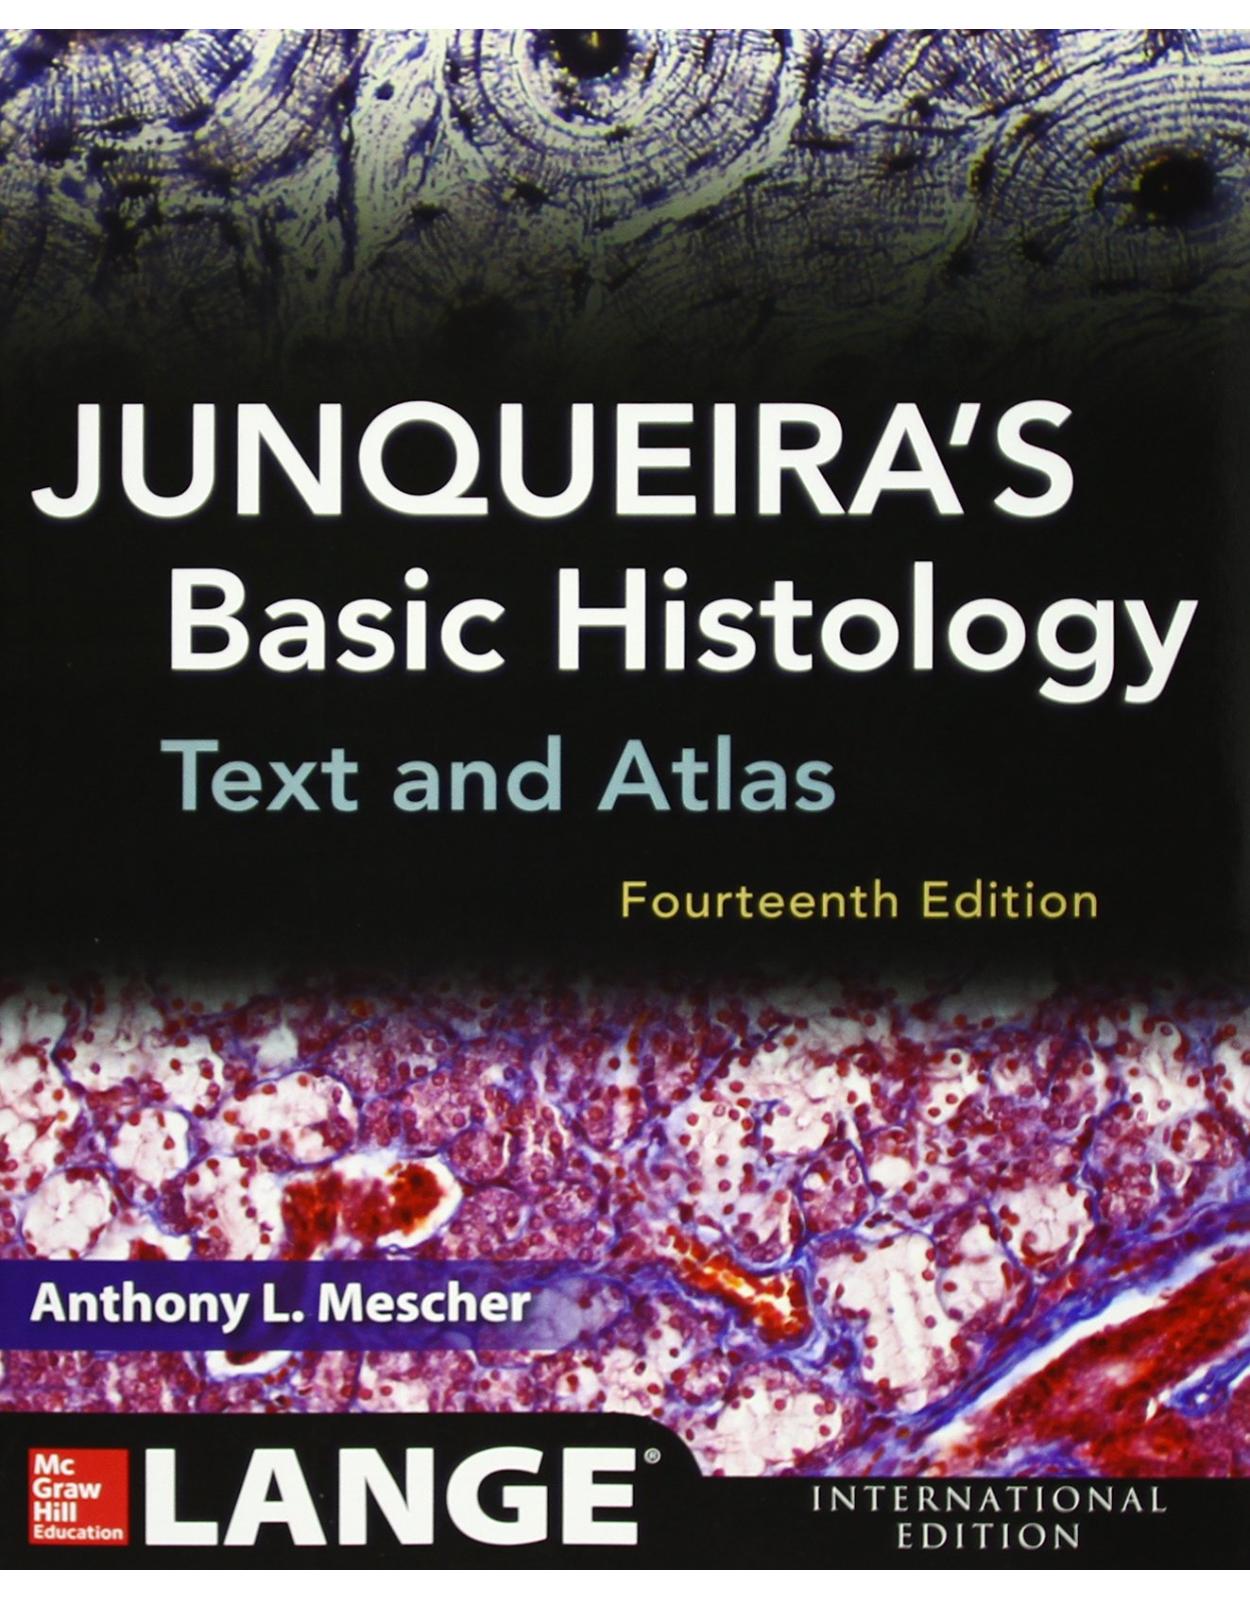 Junqueira's Basic Histology: Text and Atlas, Fourteenth Edition 